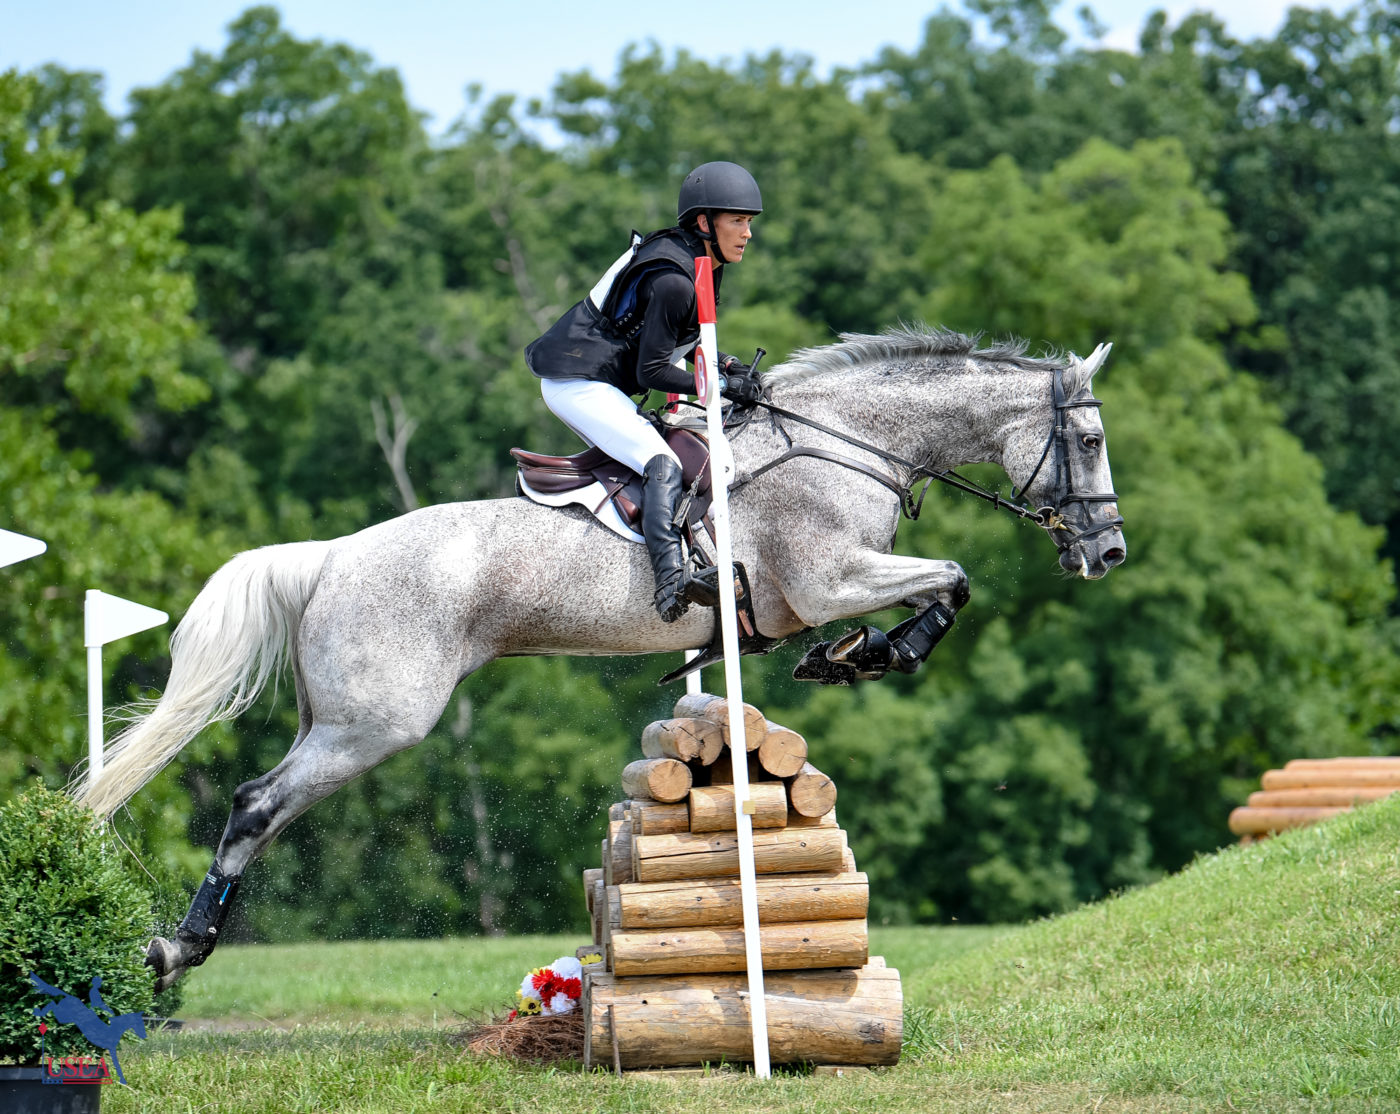 Stefanie Mazza and Brigantine jumped well out of the main water jump in the CCI3*-S. USEA/Lindsay Berreth photo